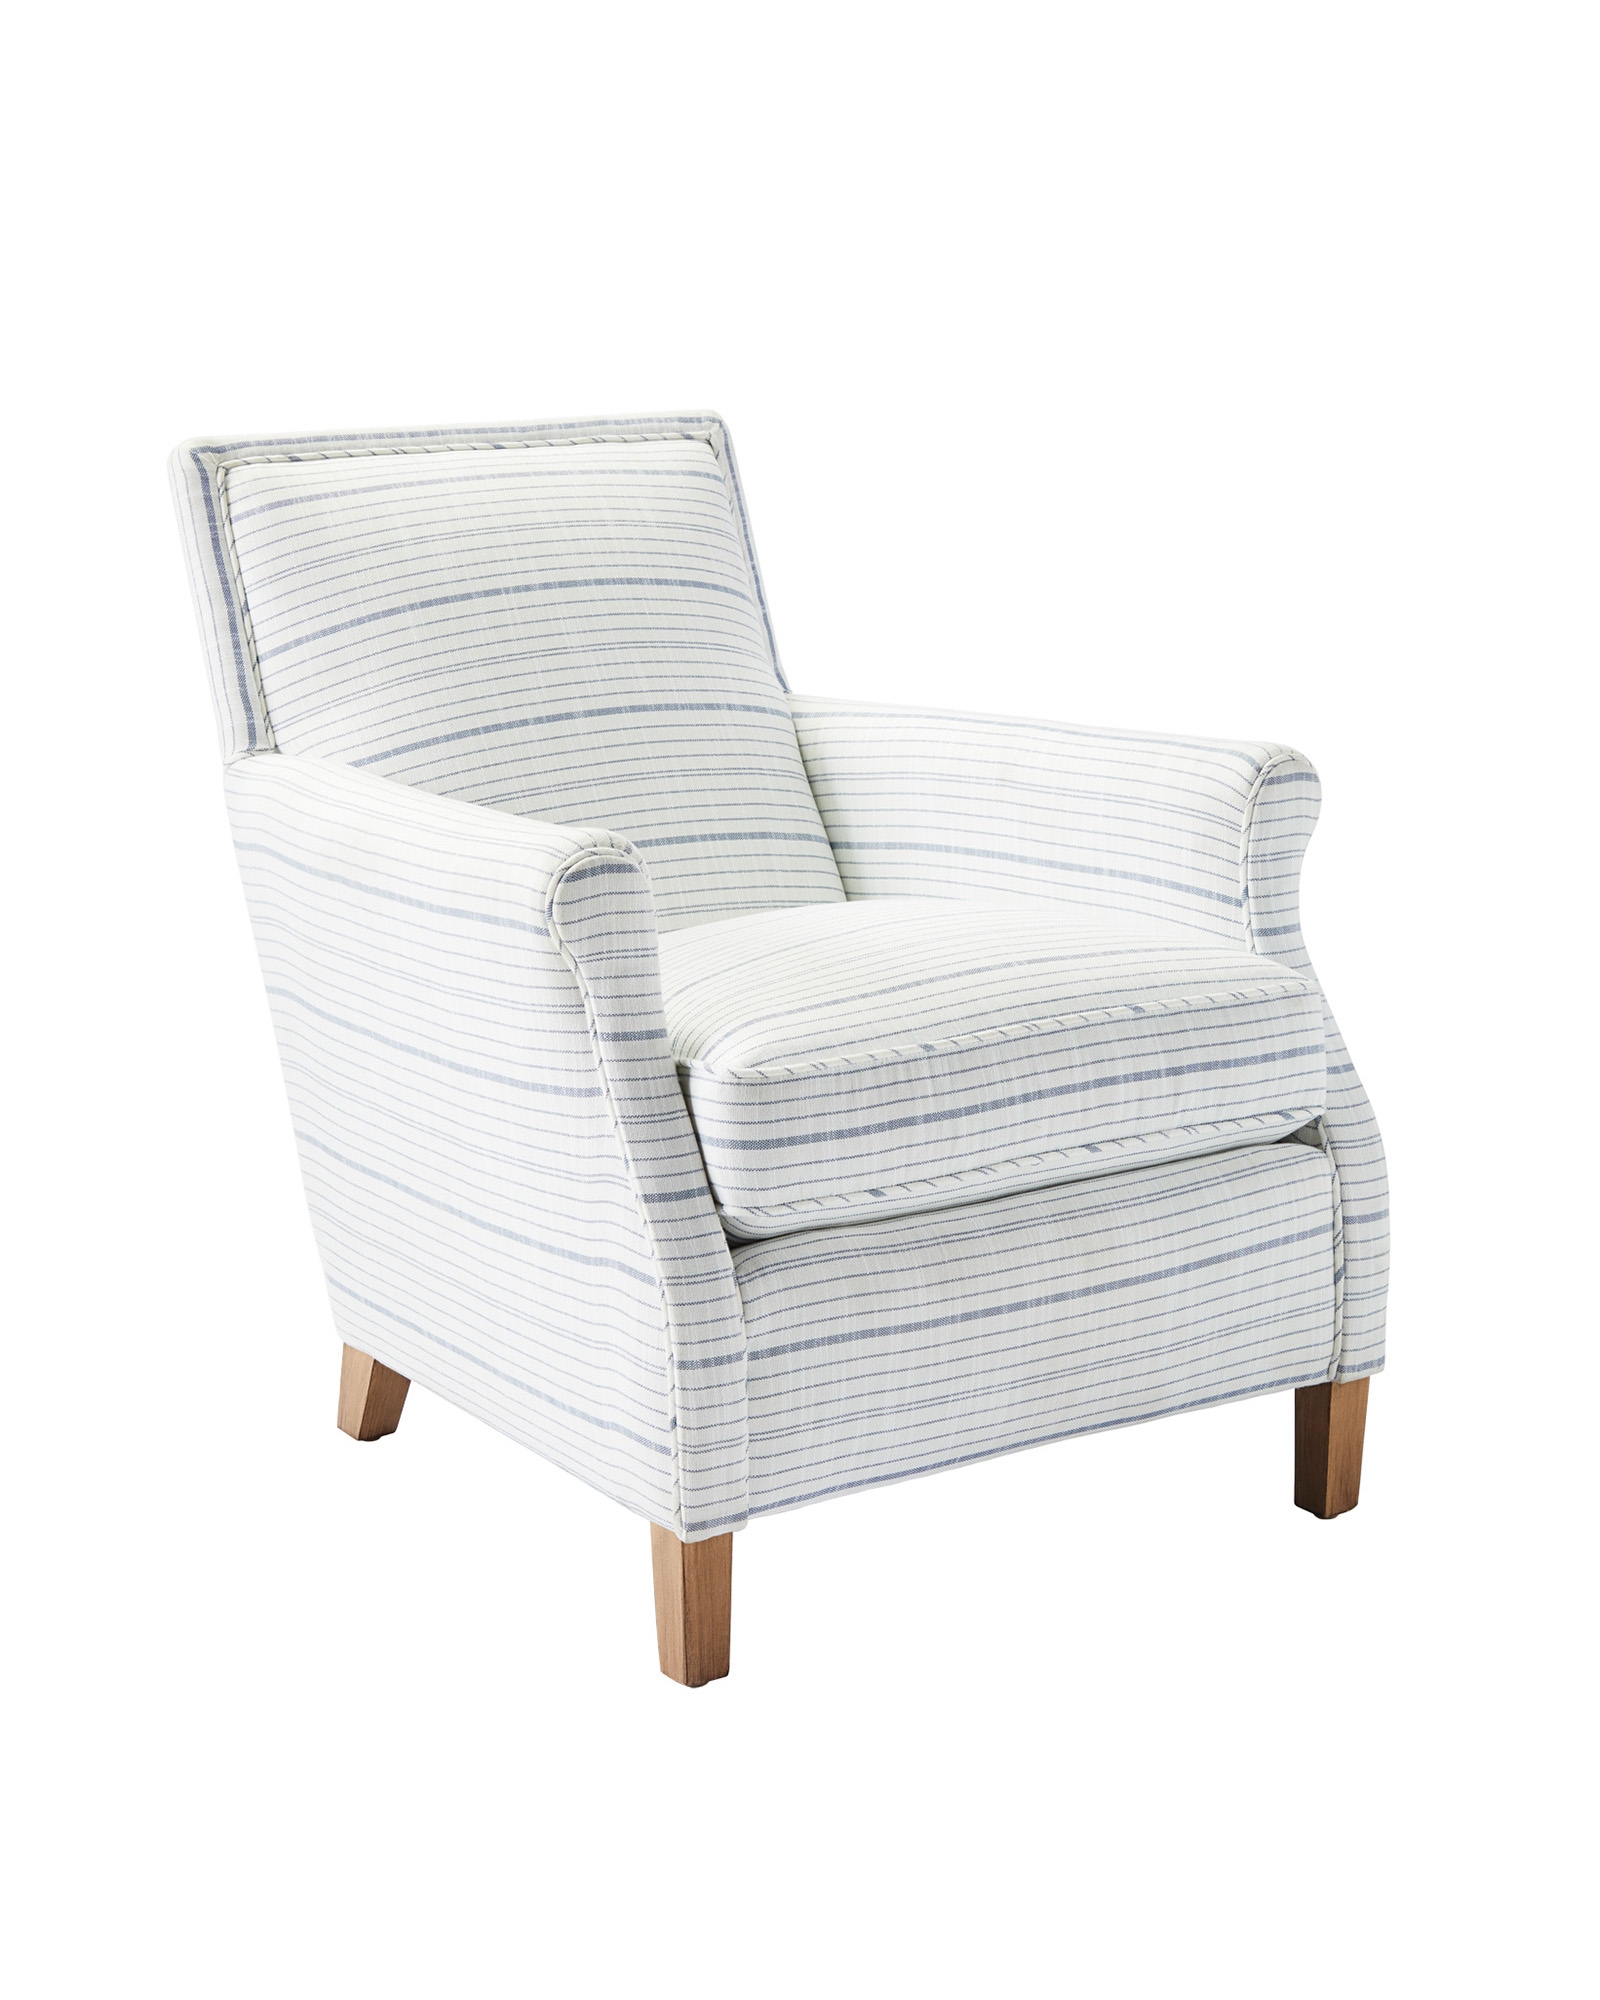 Canyon Chair - Surf Stripe Navy - Image 1